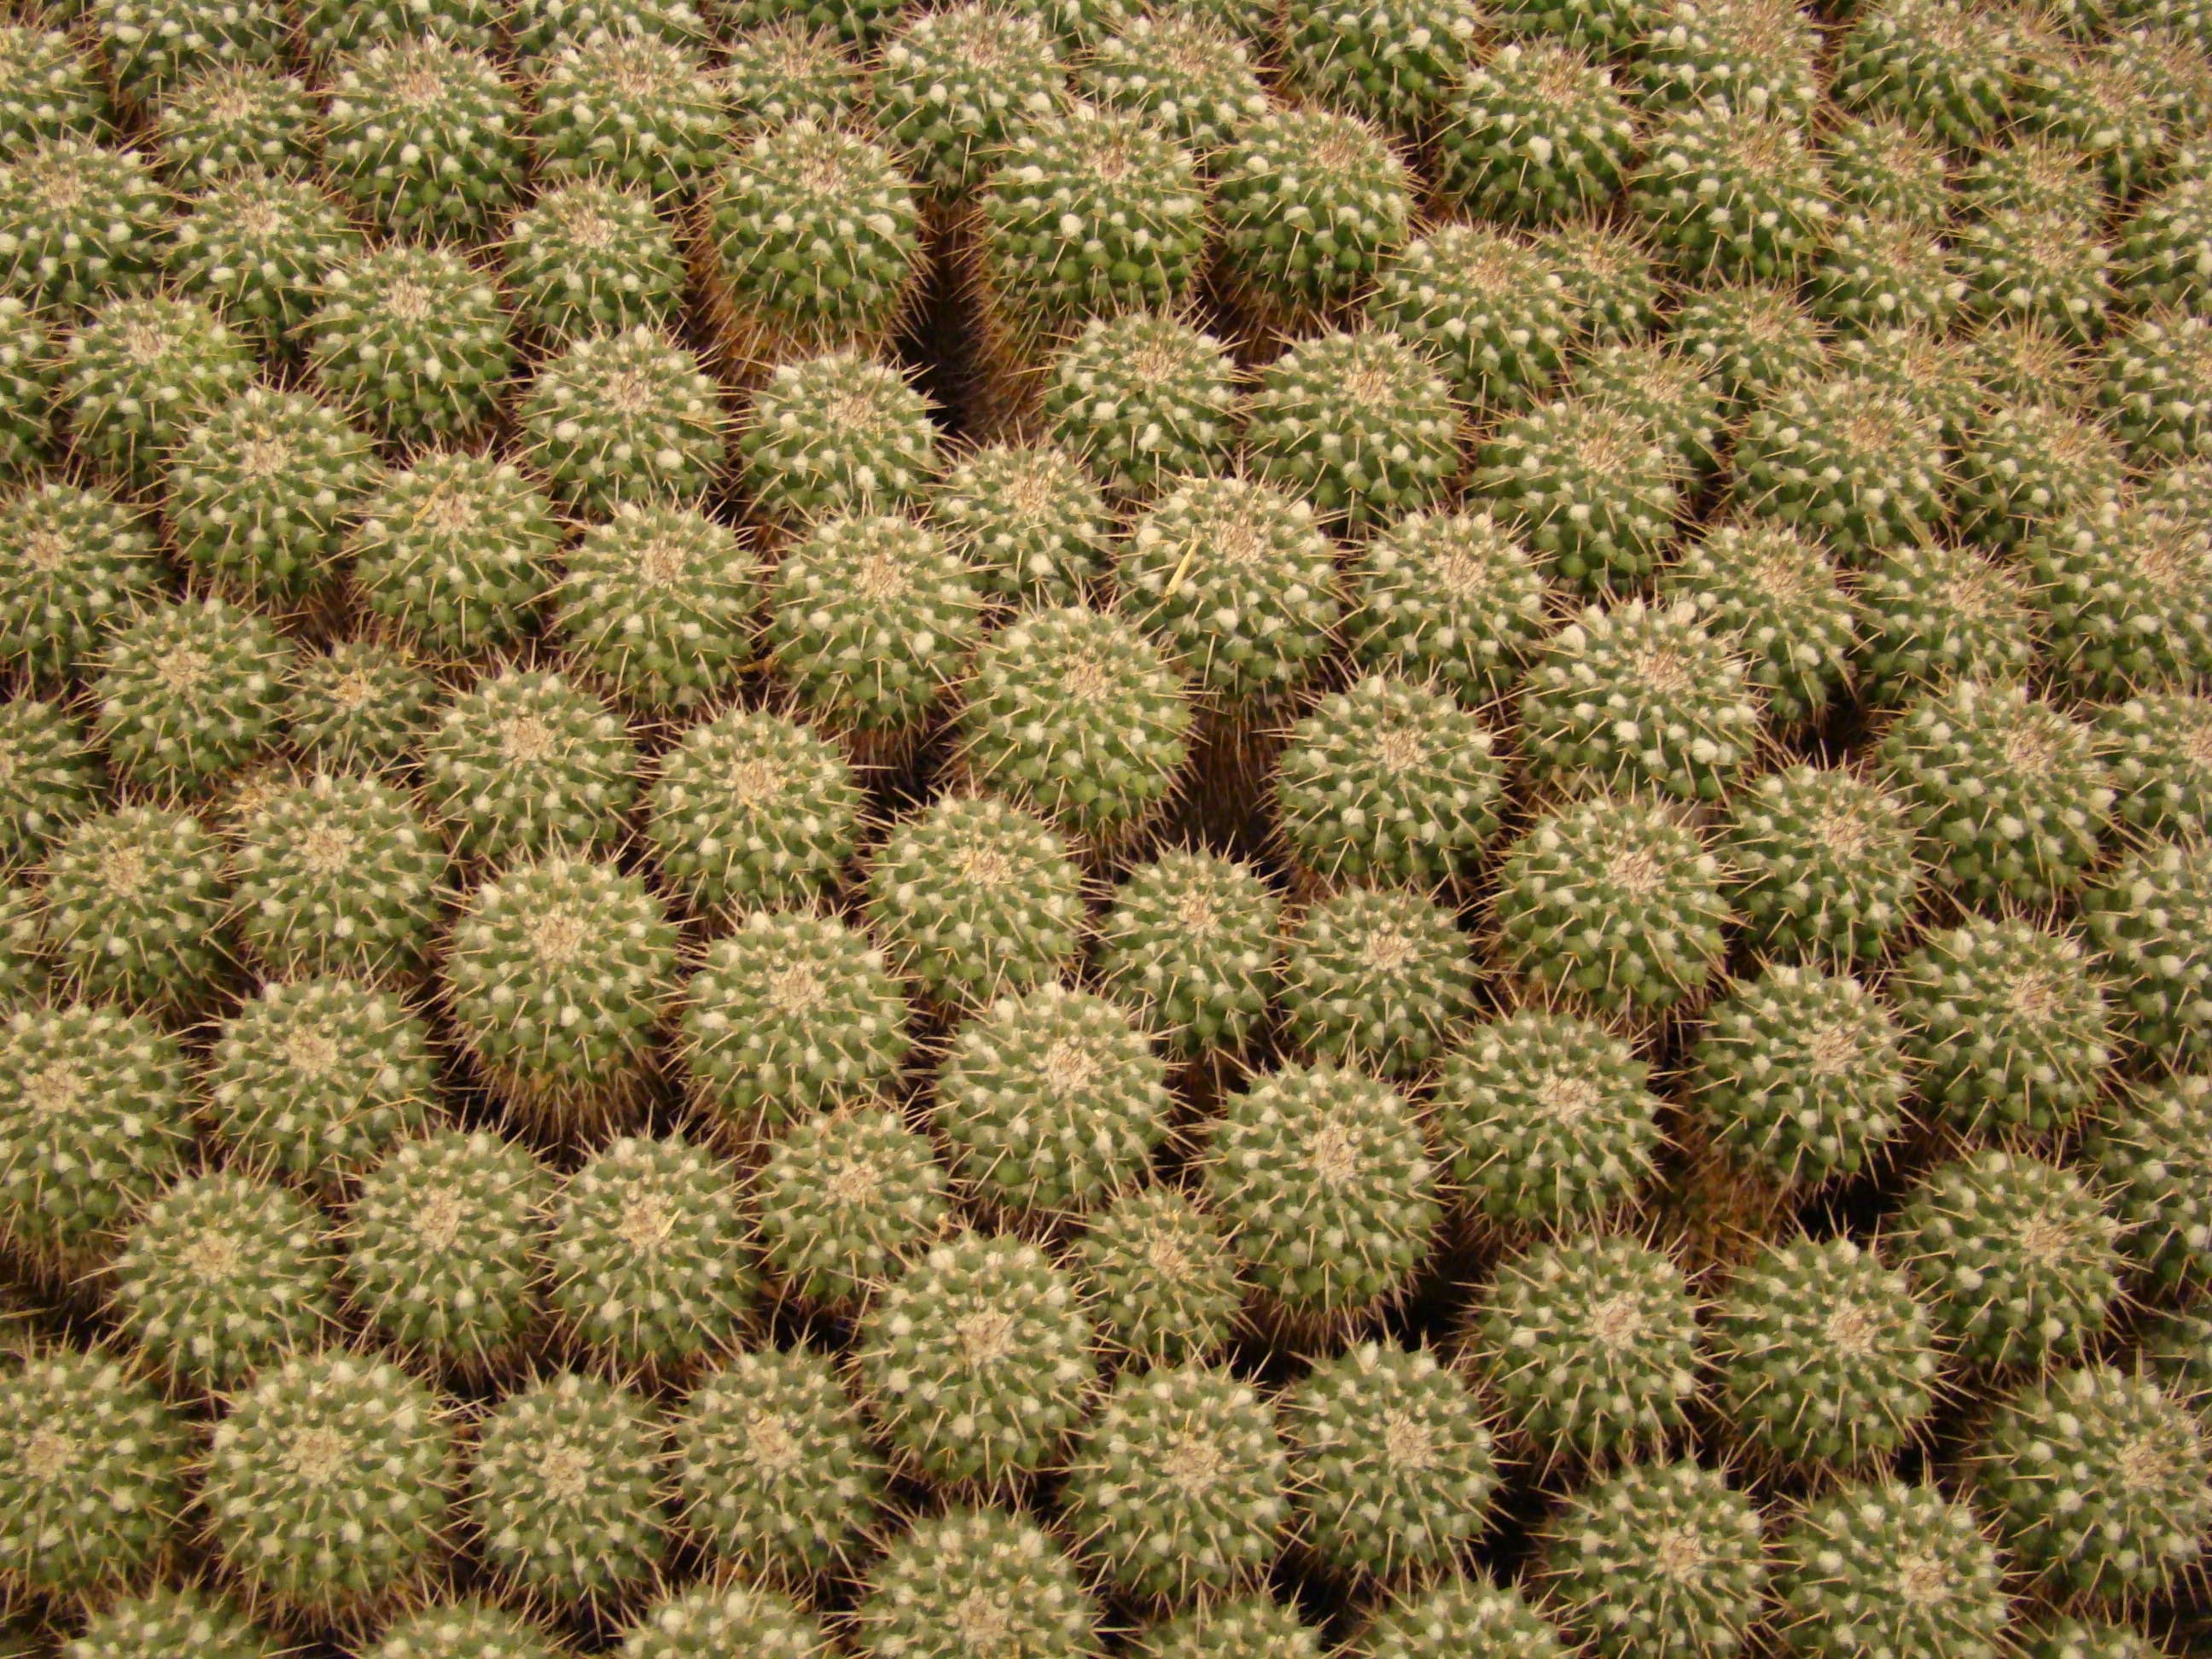 bed of cactus